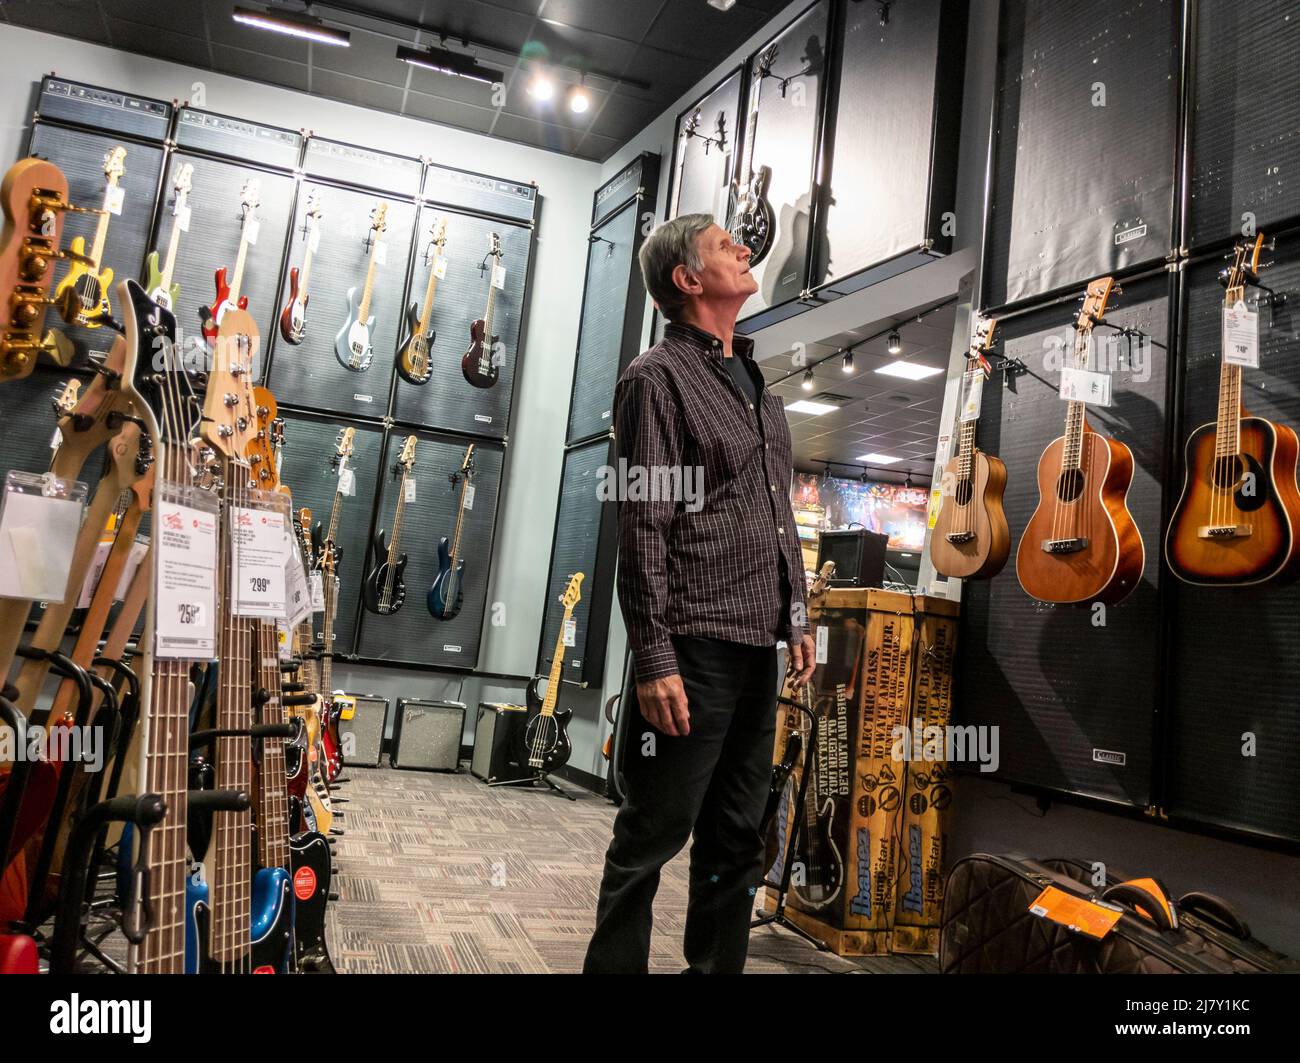 Lynnwood, WA USA - circa May 2022: View of an older Caucasian man shopping for bass guitars inside a Guitar Center musical instrument store. Stock Photo